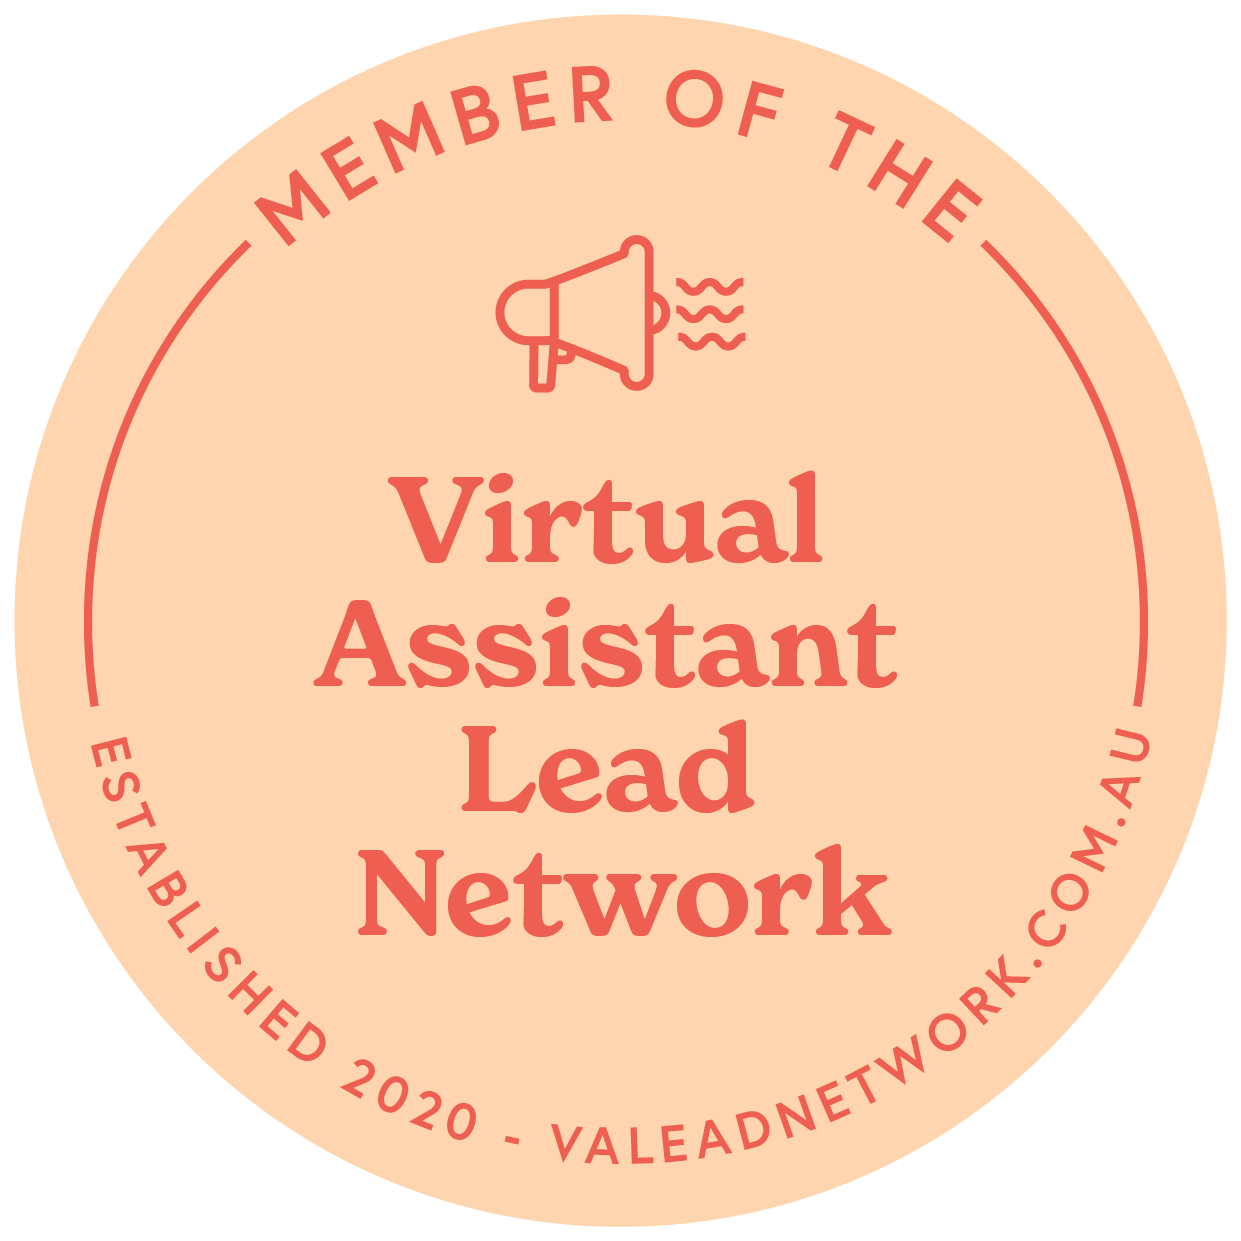 Badge showing that I am a member of the Virtual Assistant Lead Network.